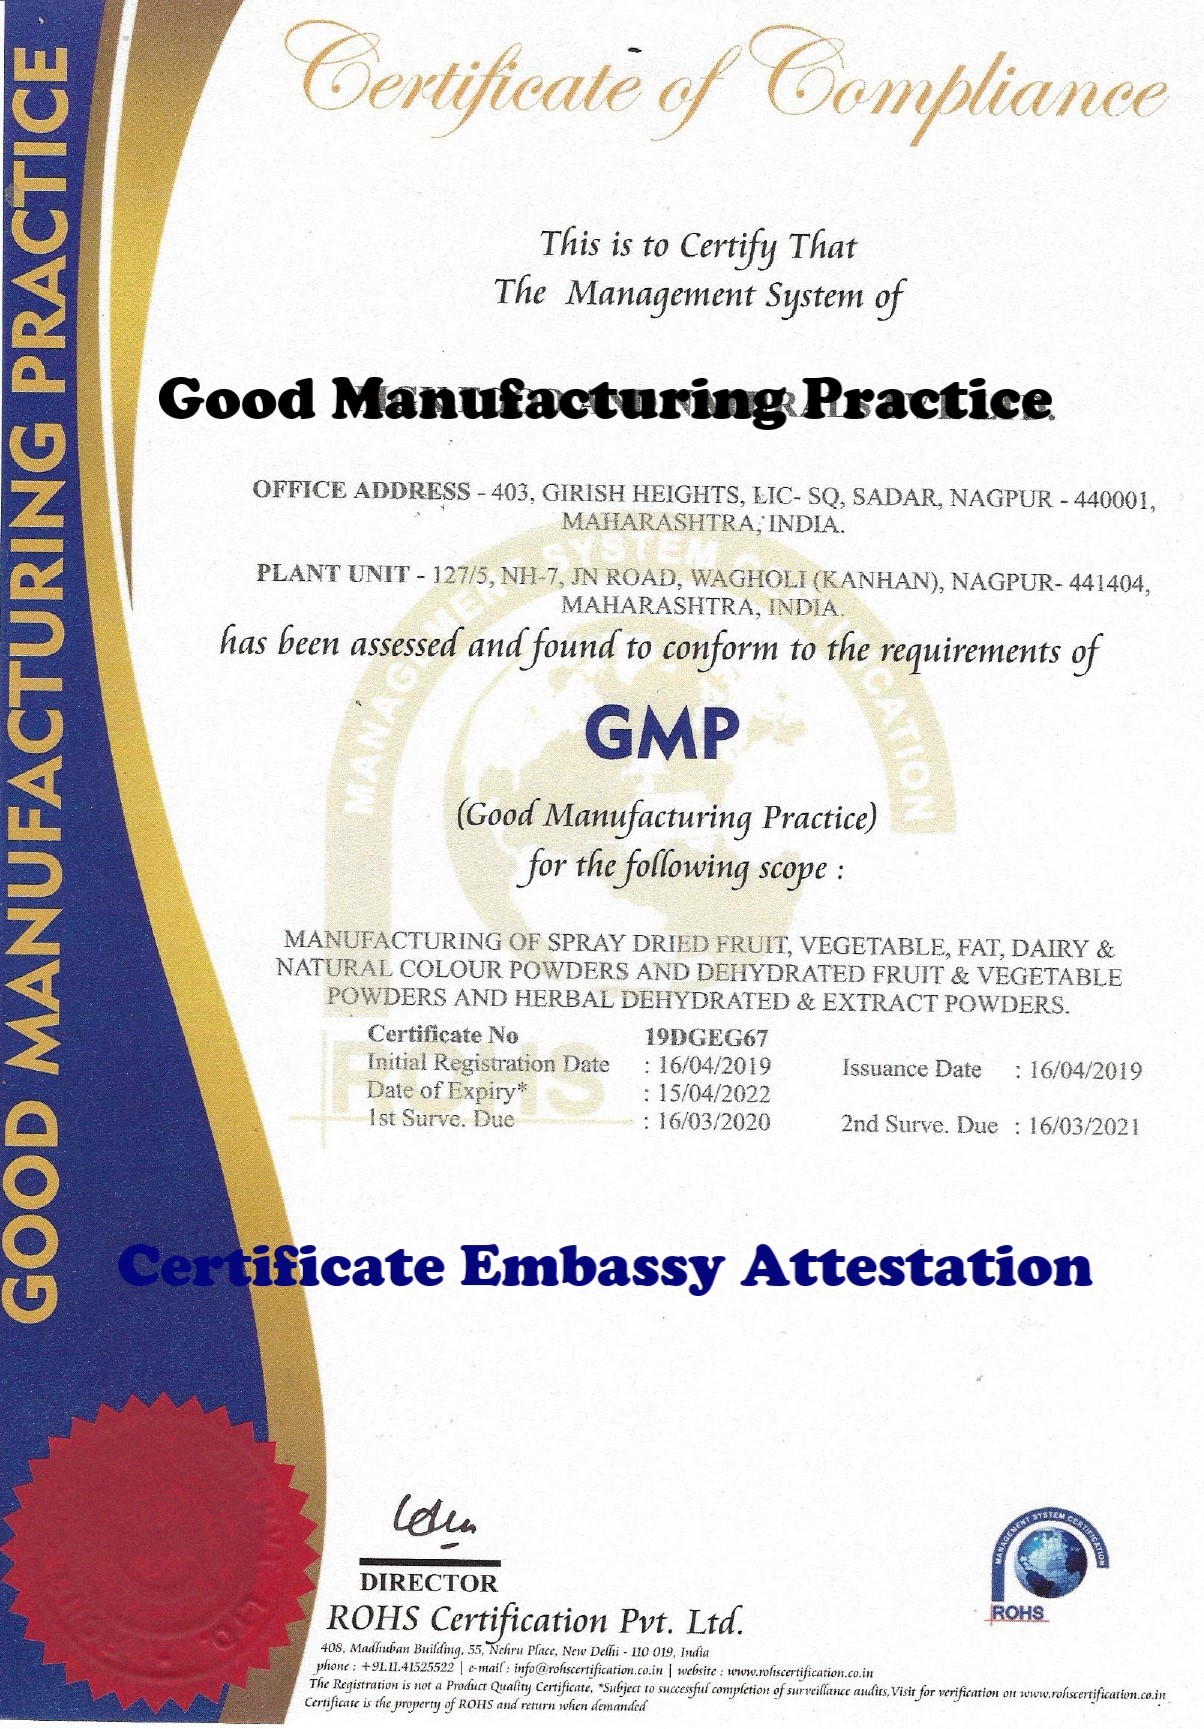 GMP Certificate Attestation from Japan Embassy